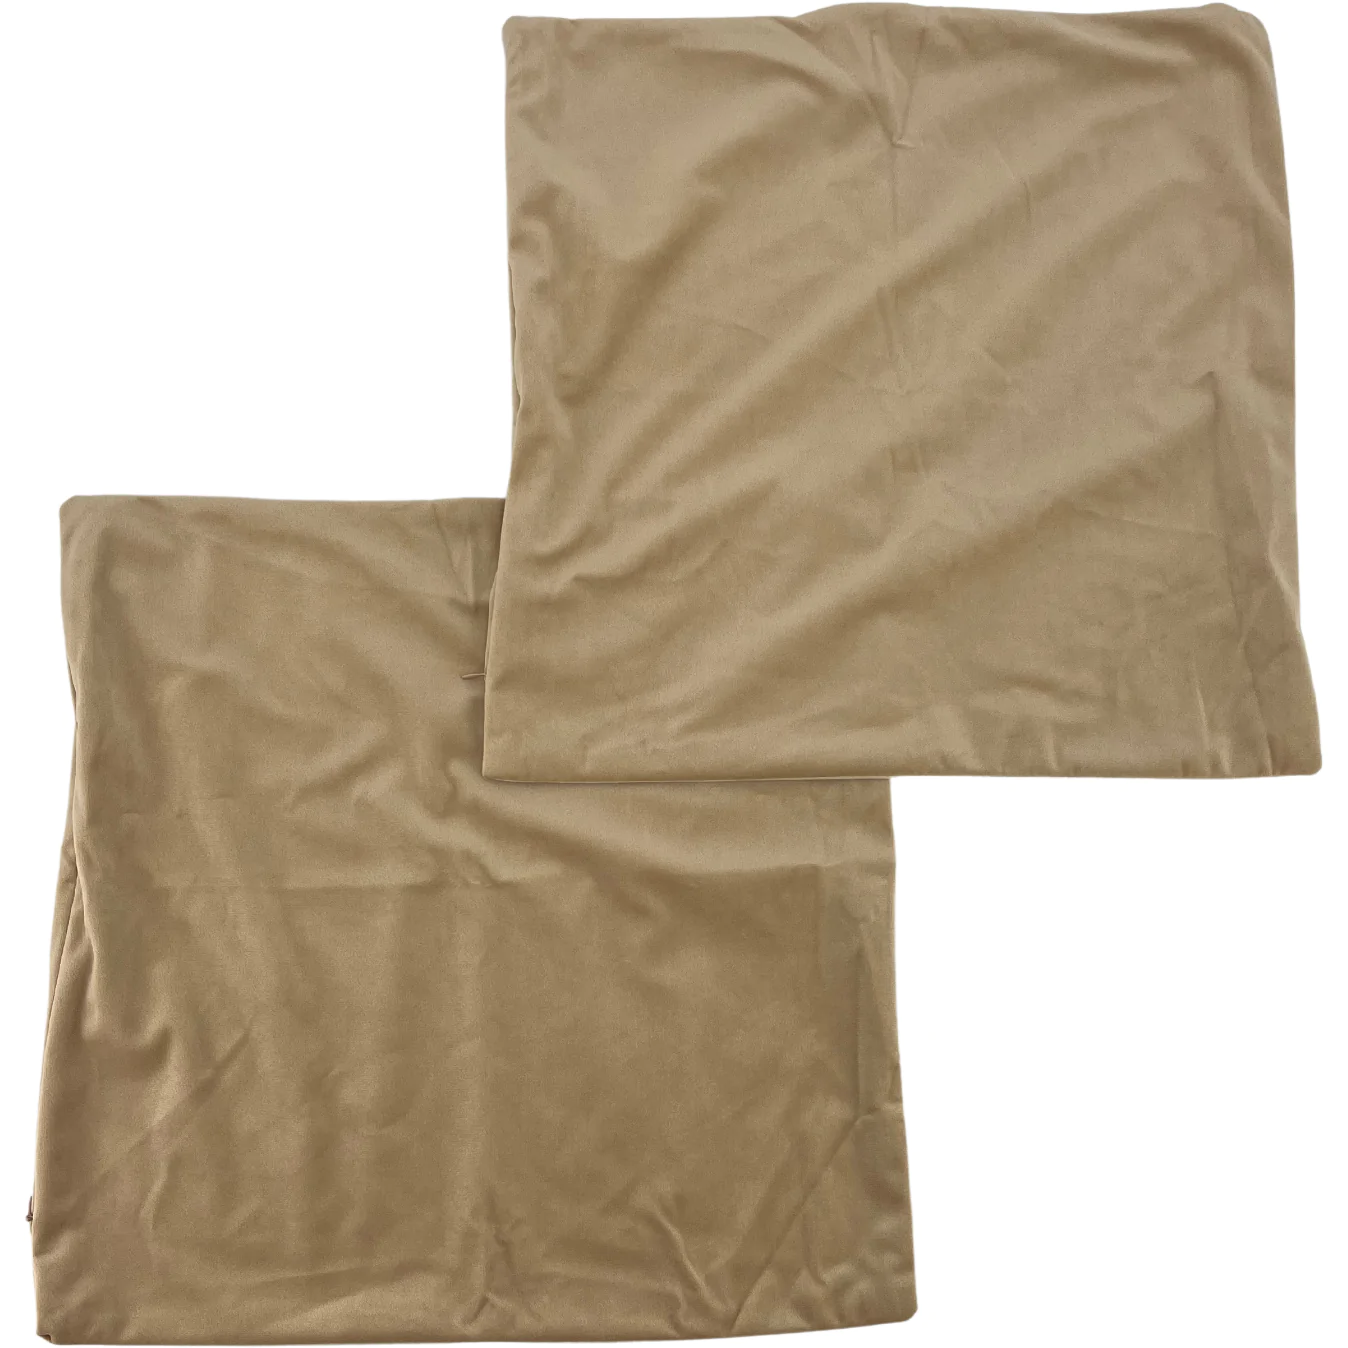 Pillow Covers / Taupe / Plush / 2 Piece Set